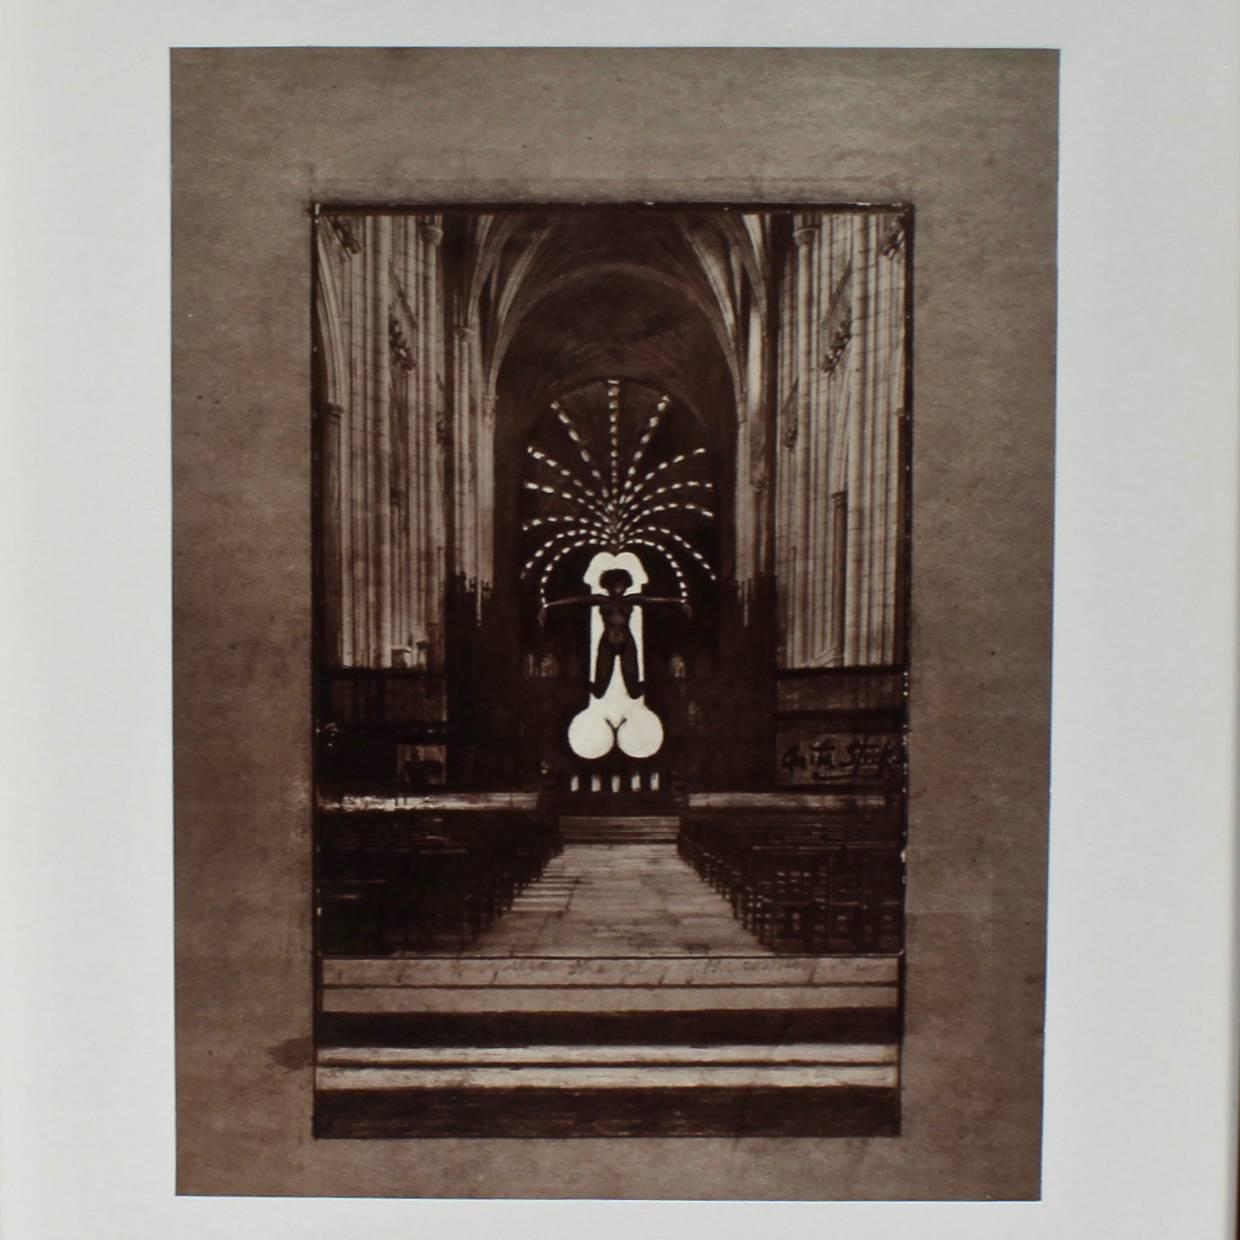 Cathedral by Anita Steckel (1930-2012)

A feminist erotica print signed Anita Steckel in the image.

Steckel was an important and controversial feminist artist working in New York in the second half of the 20th century. Her work is widely held